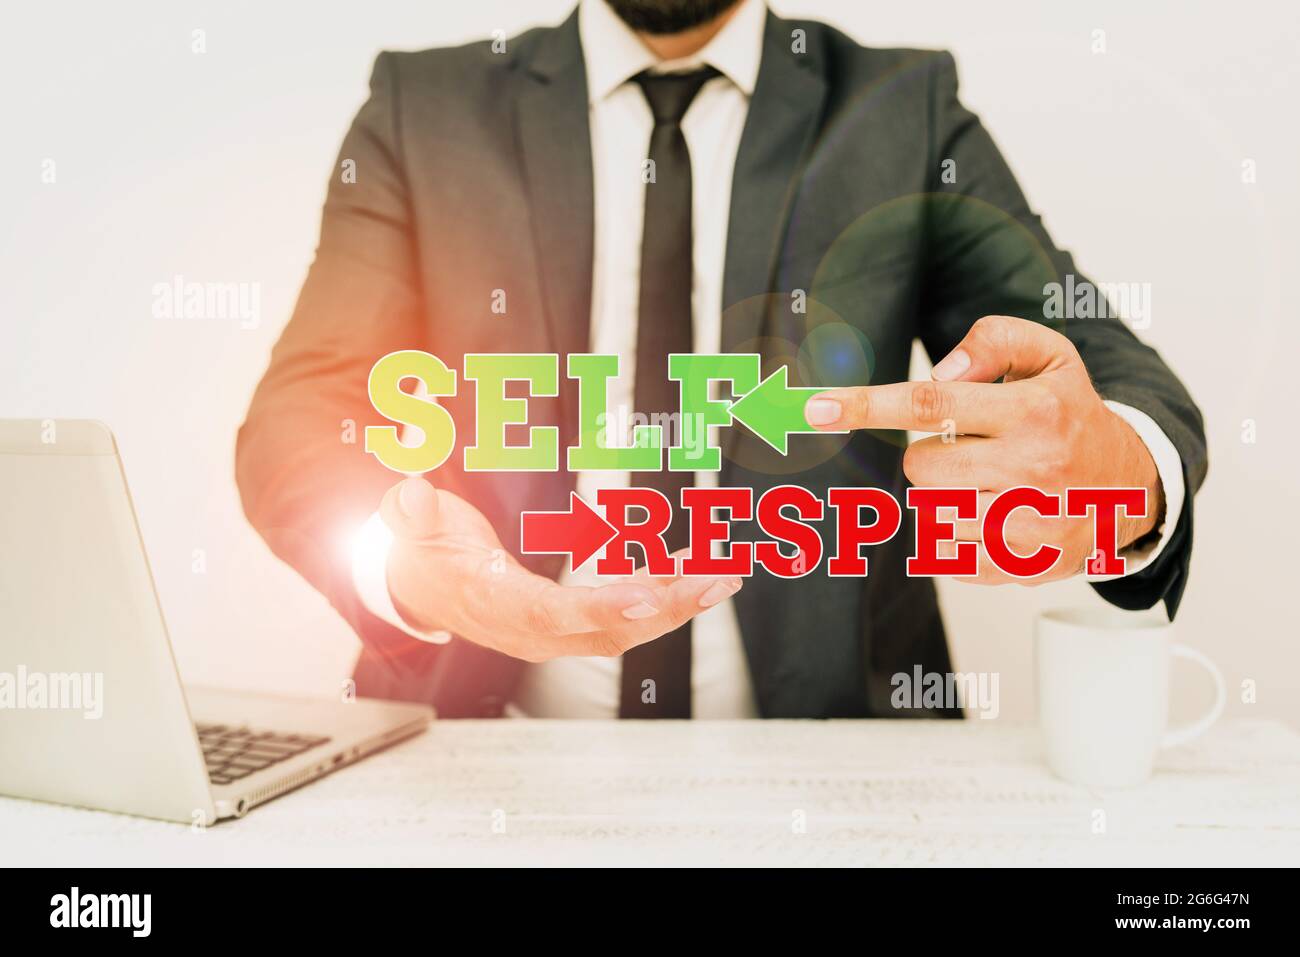 Inspiration showing sign Self Respect. Business concept Pride and confidence in oneself Stand up for yourself Remote Office Work Online Presenting Stock Photo